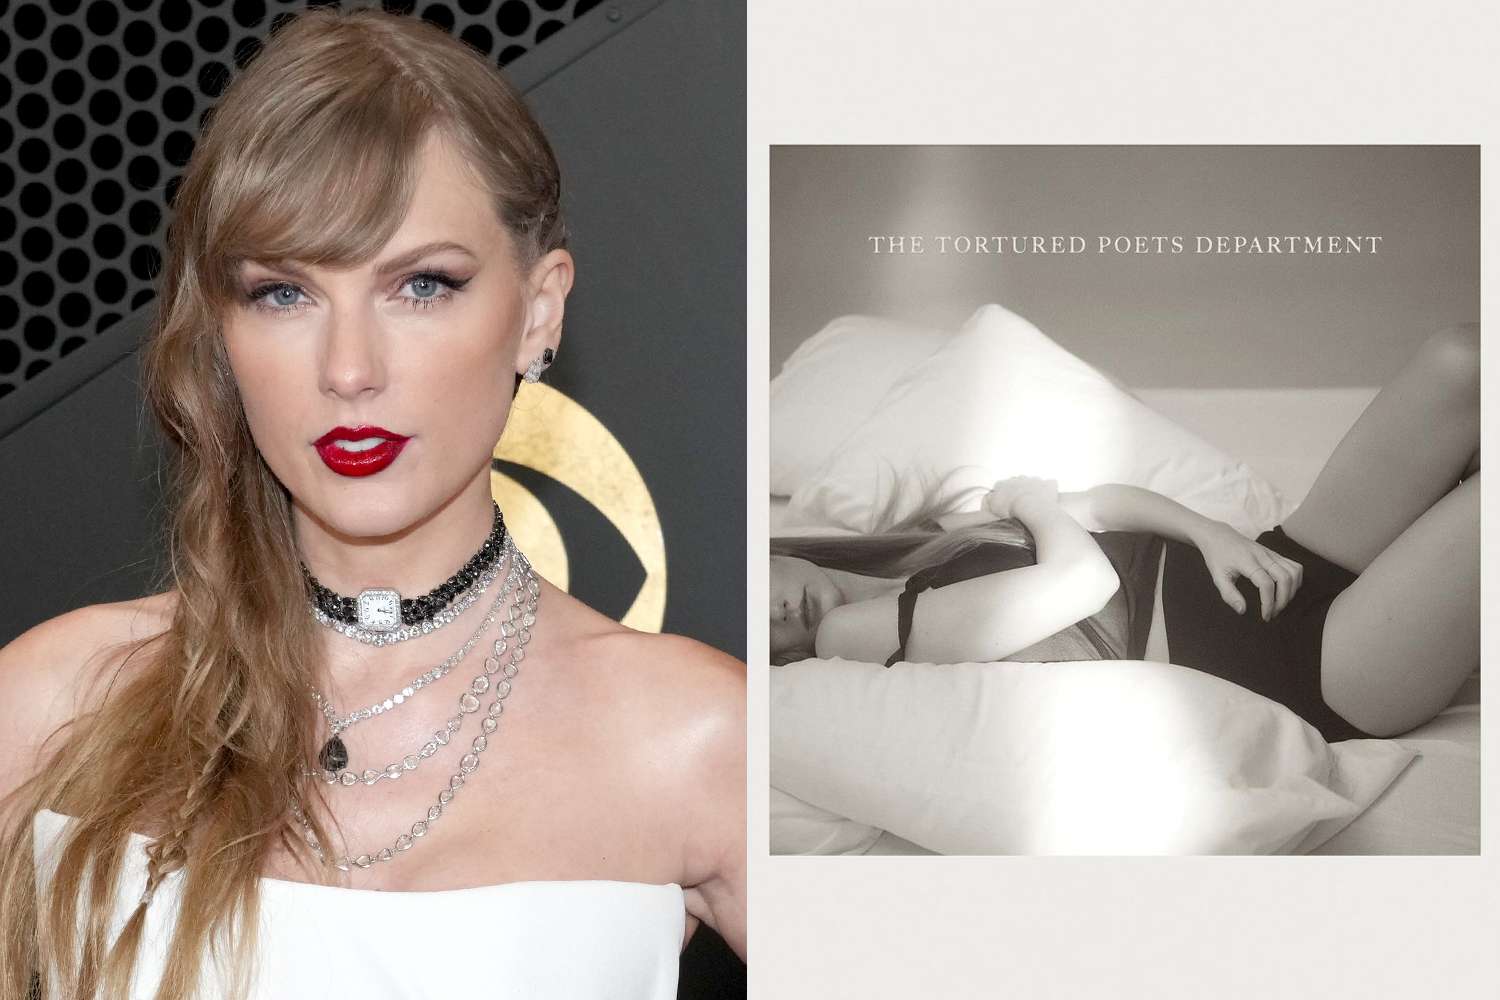 Swifties, grab your tissues and crank up the volume! Taylor Swift's upcoming album, Taylor Swift Says Writing The Tortured Poets Department Was A 'Lifeline' For Her After Breakups!